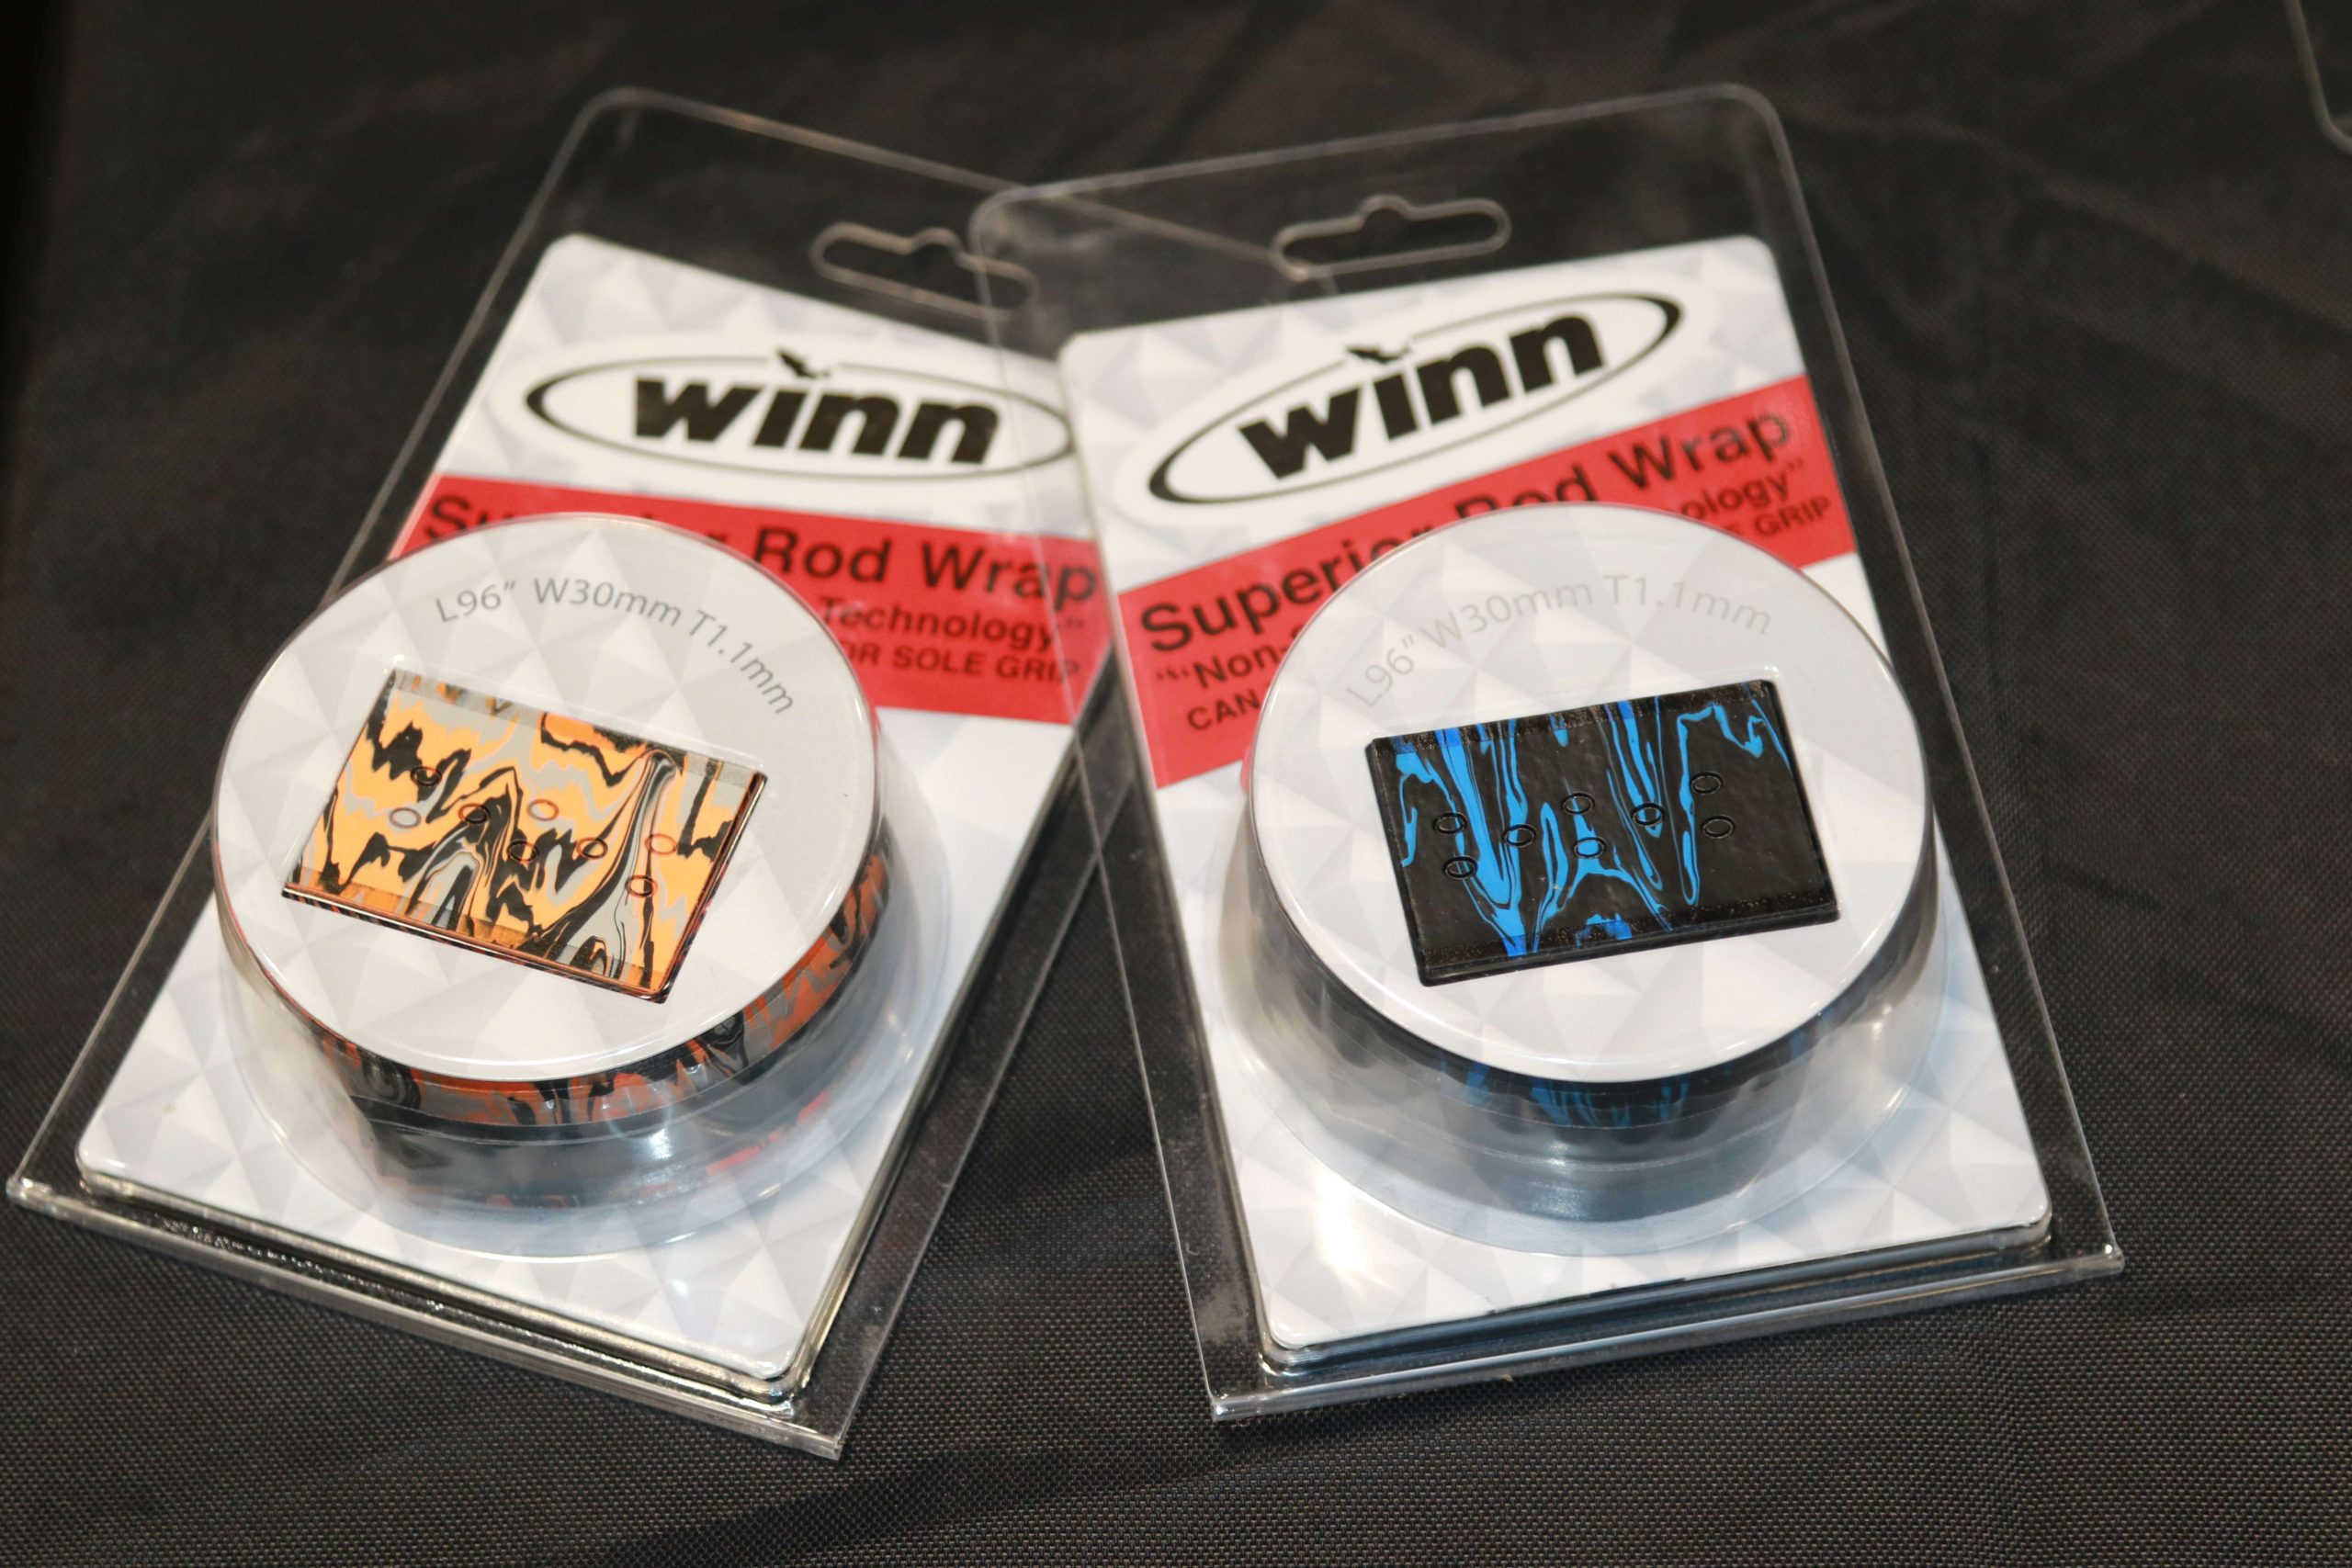 WINN debuted two new color options for its Superior Rod Wrap material.